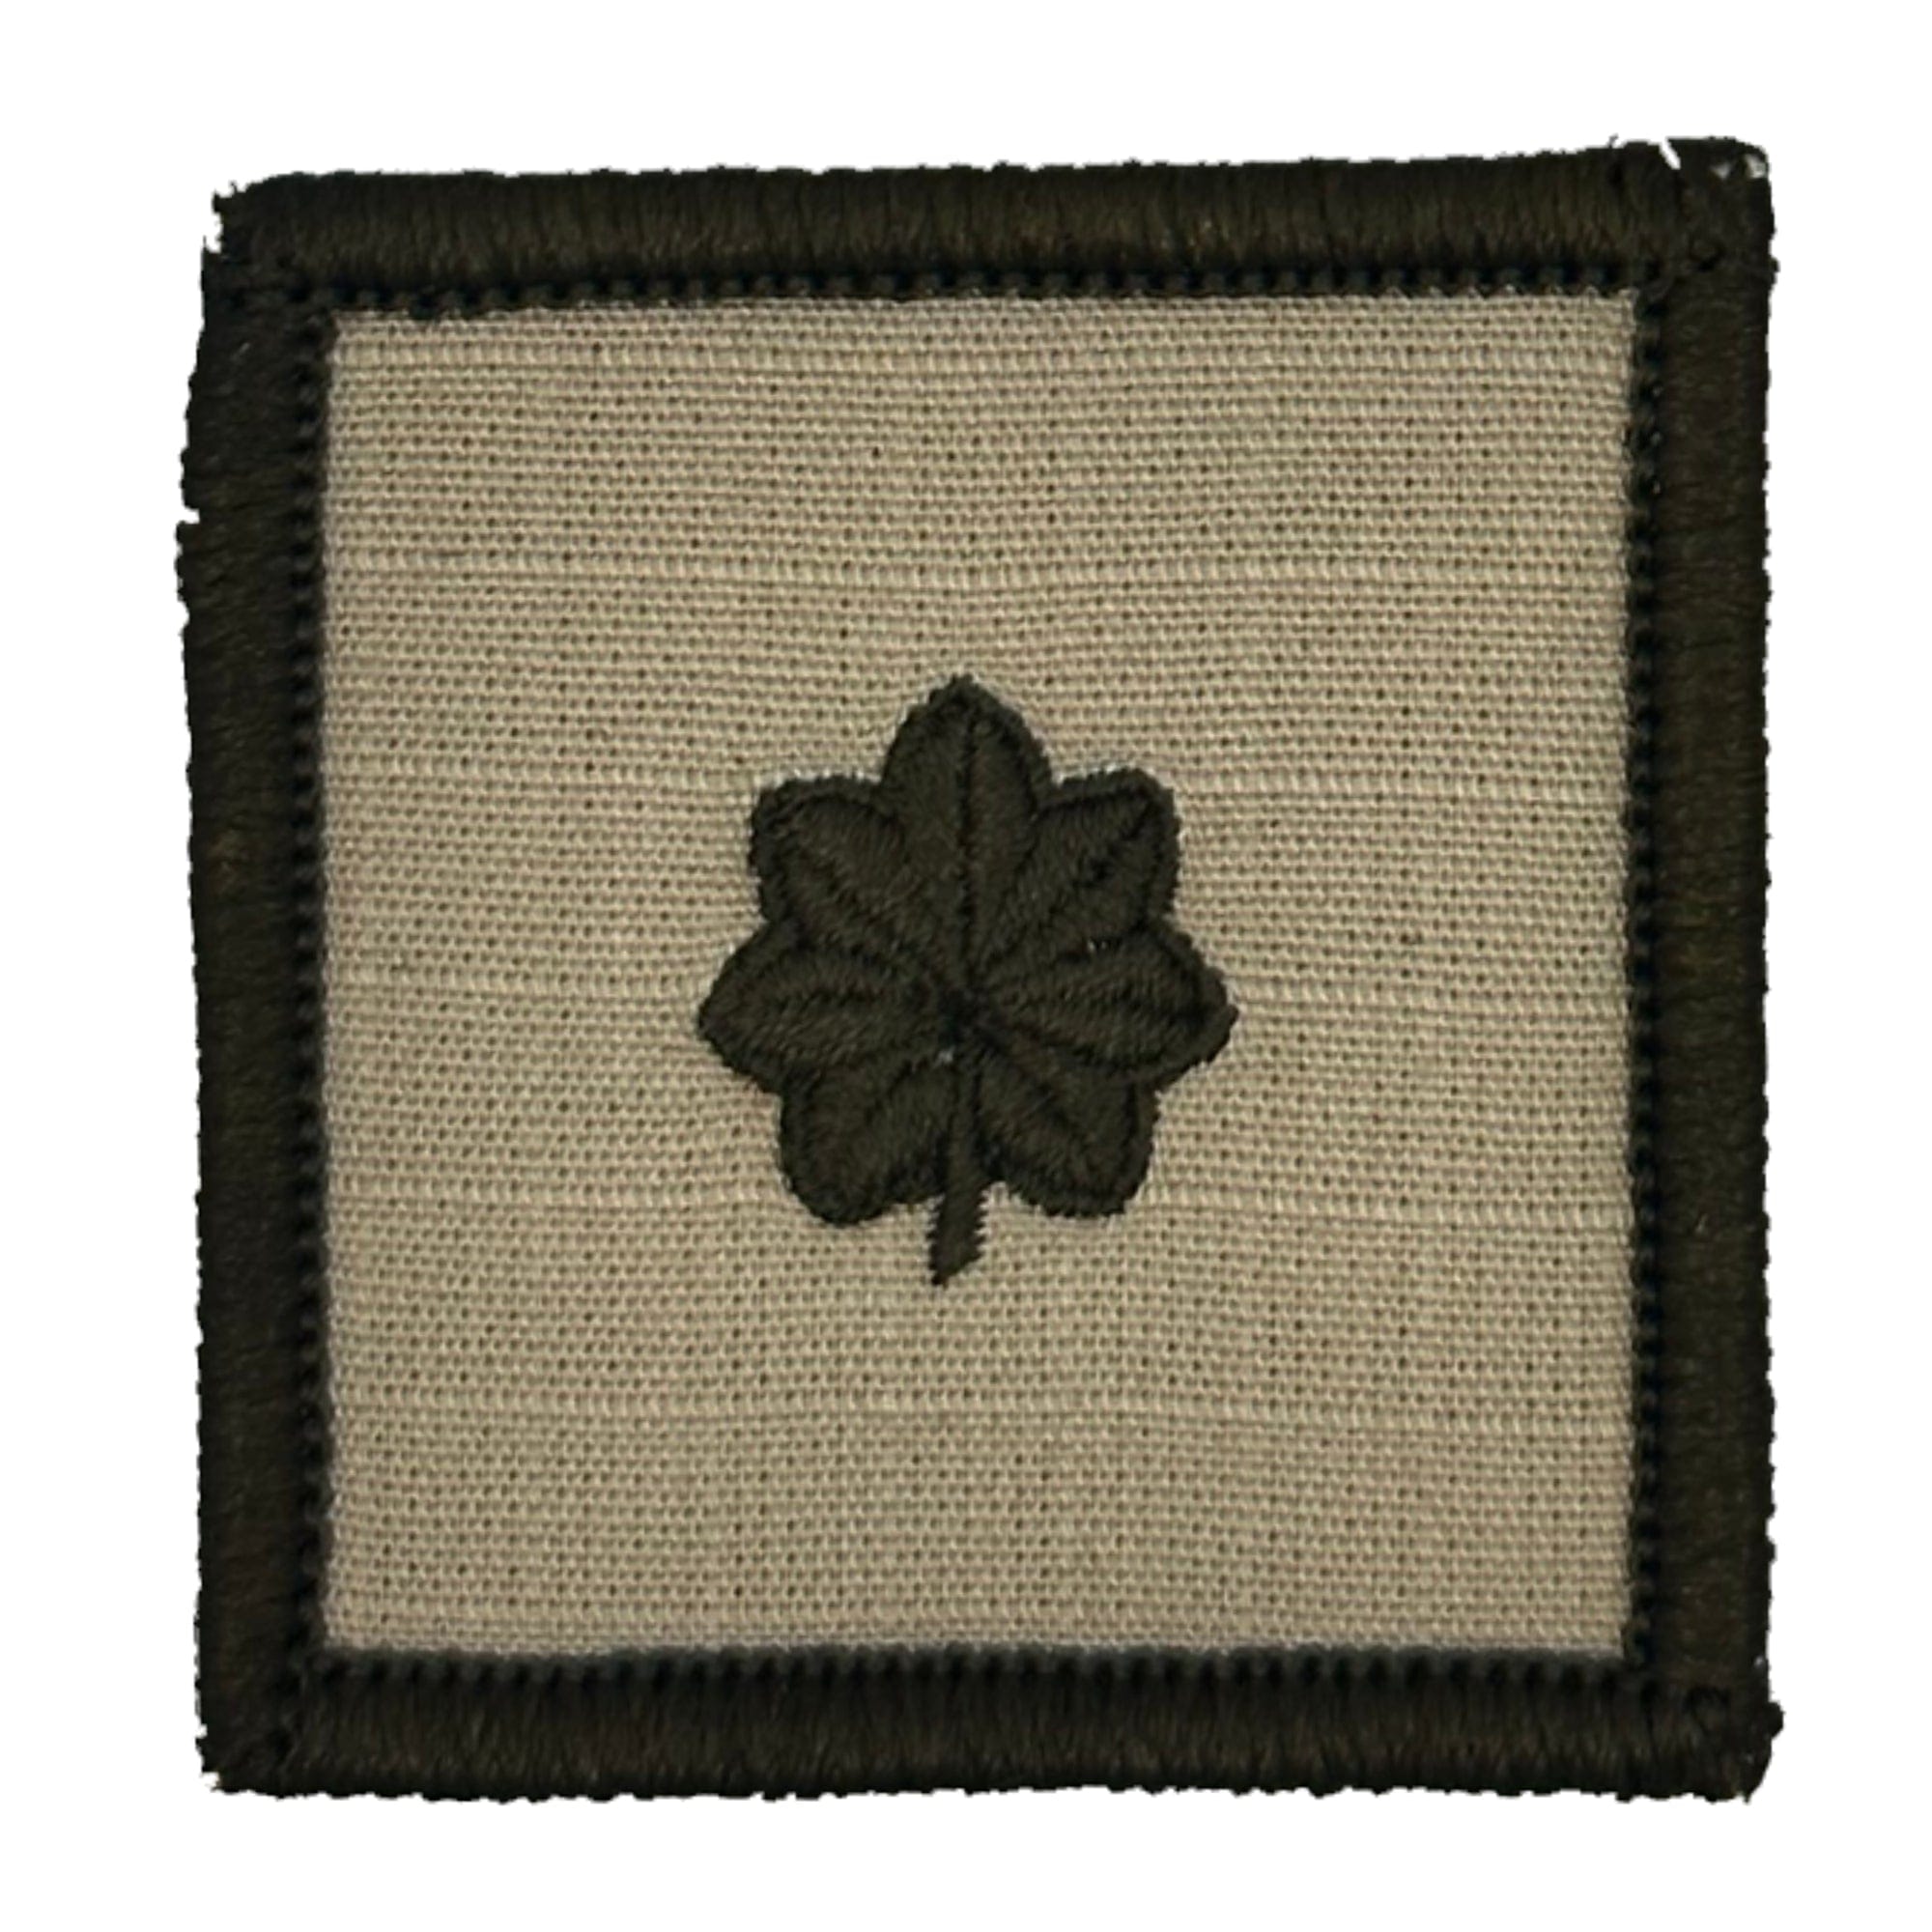 Tactical Gear Junkie Patches USMC Rank Insignia - 2x2 Patch